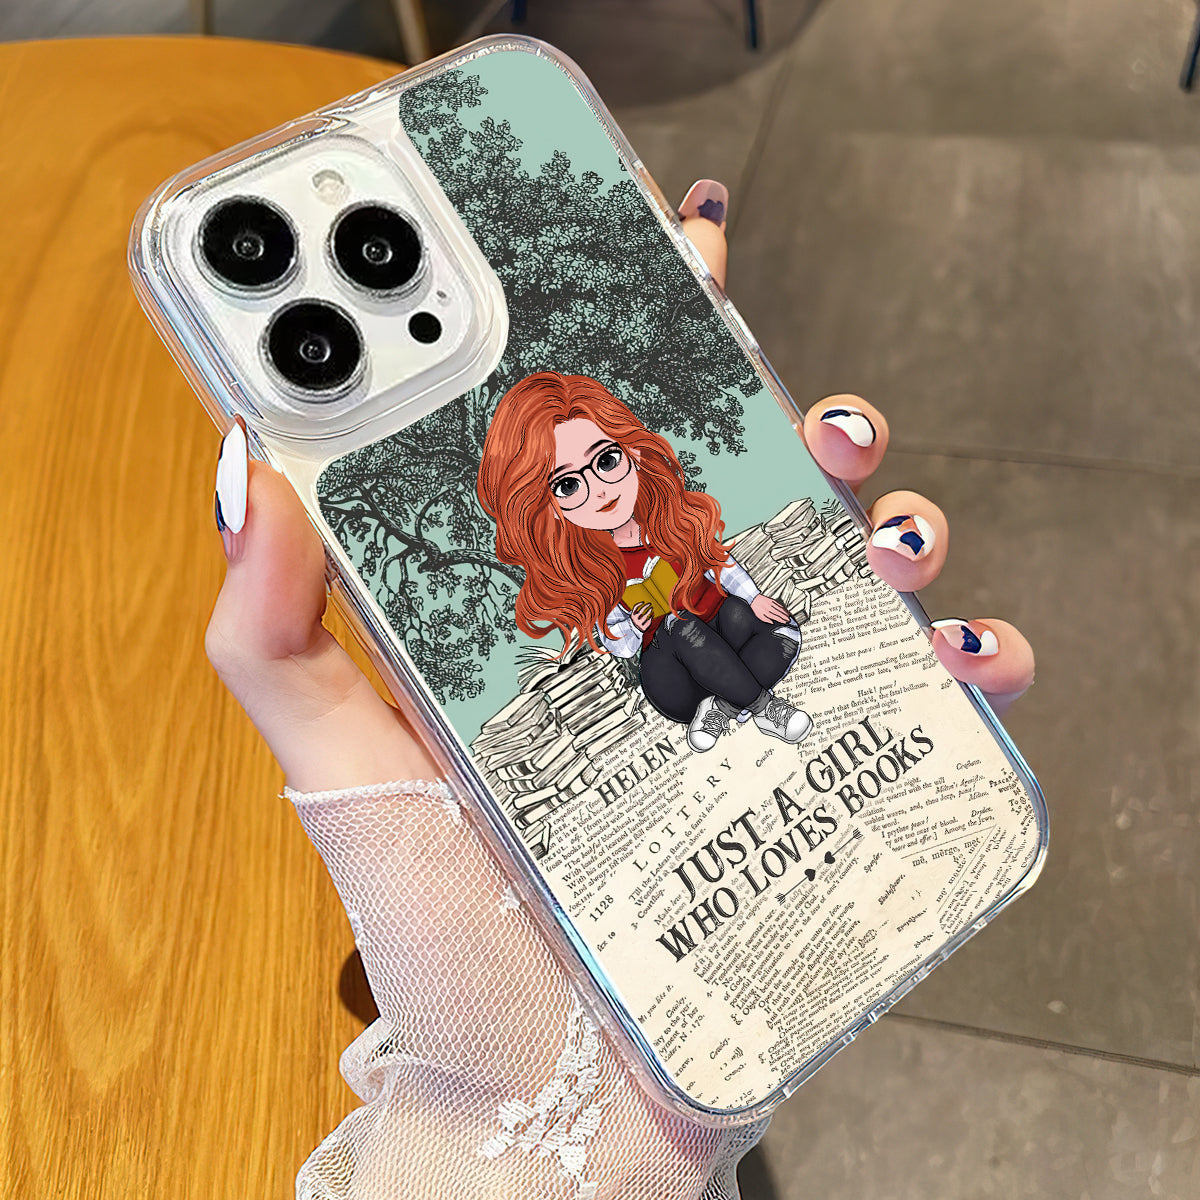 Just A Girl Who Loves Book - Personalized Book Clear Phone Case